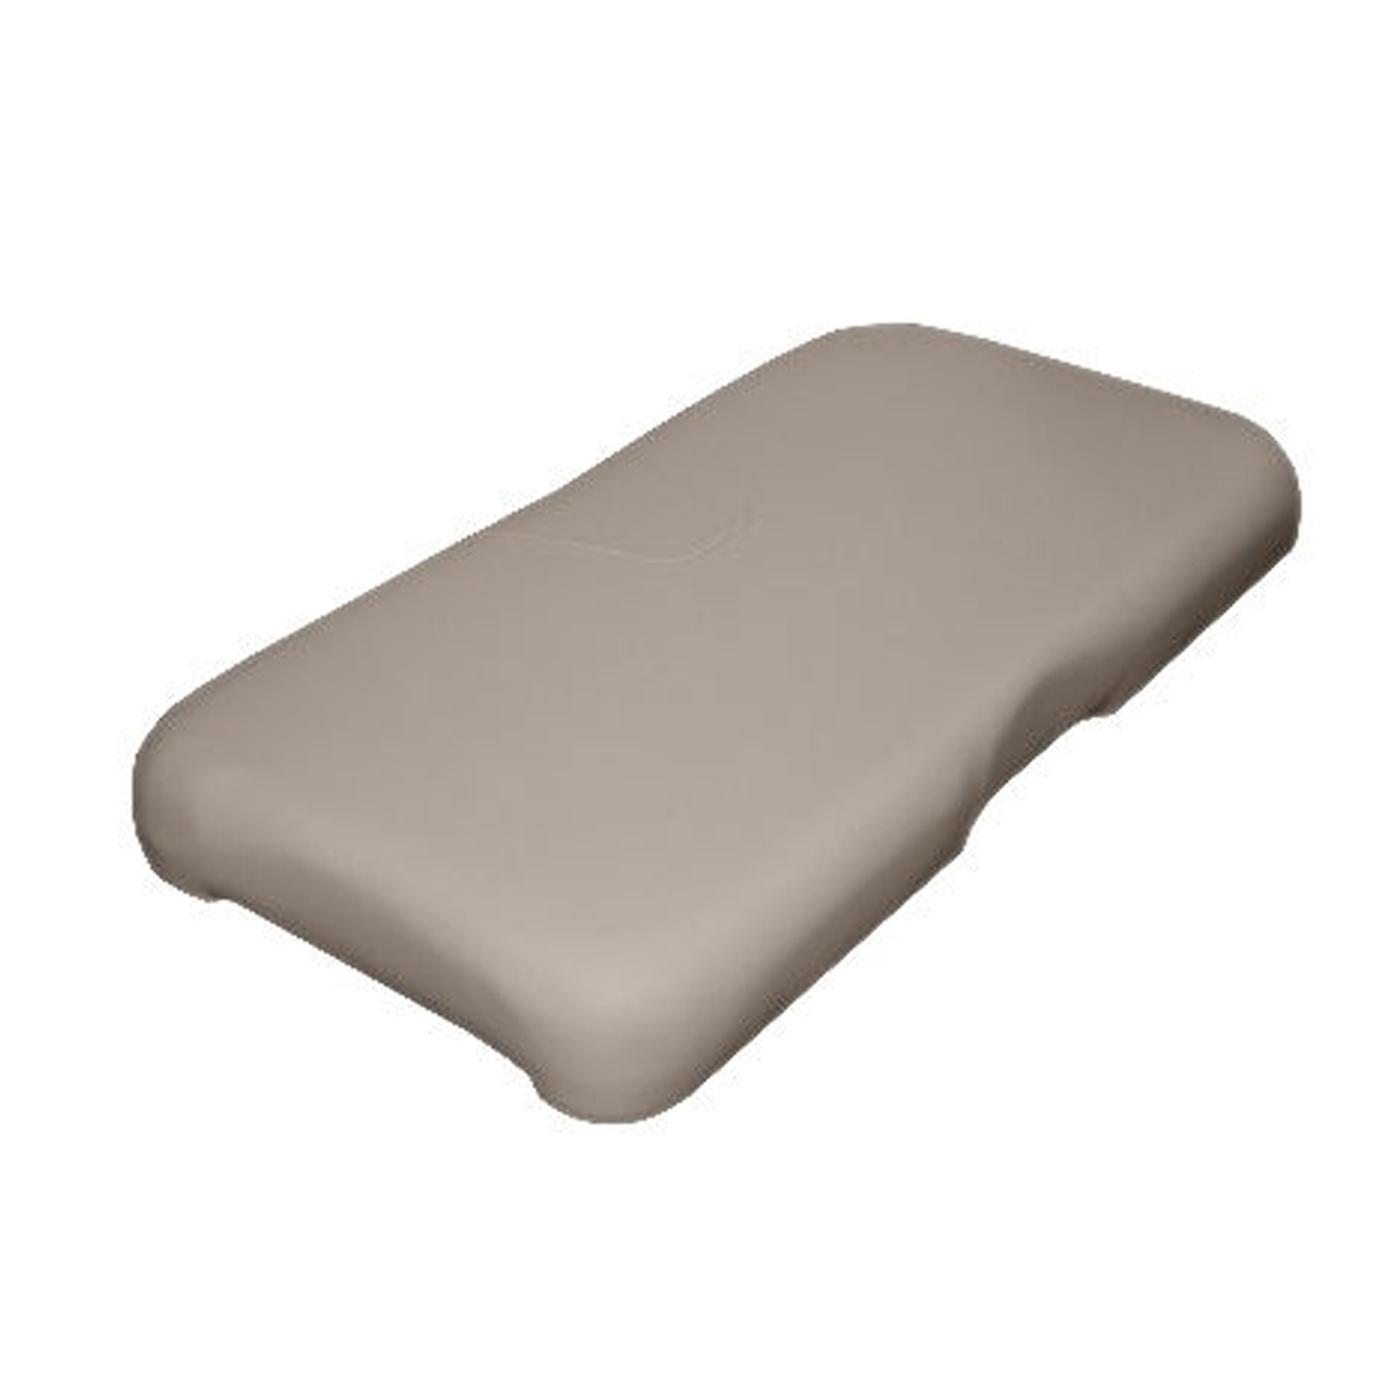 EZGO RXV Stone Beige Seat Bottom Assembly (Fits 2008-Up)